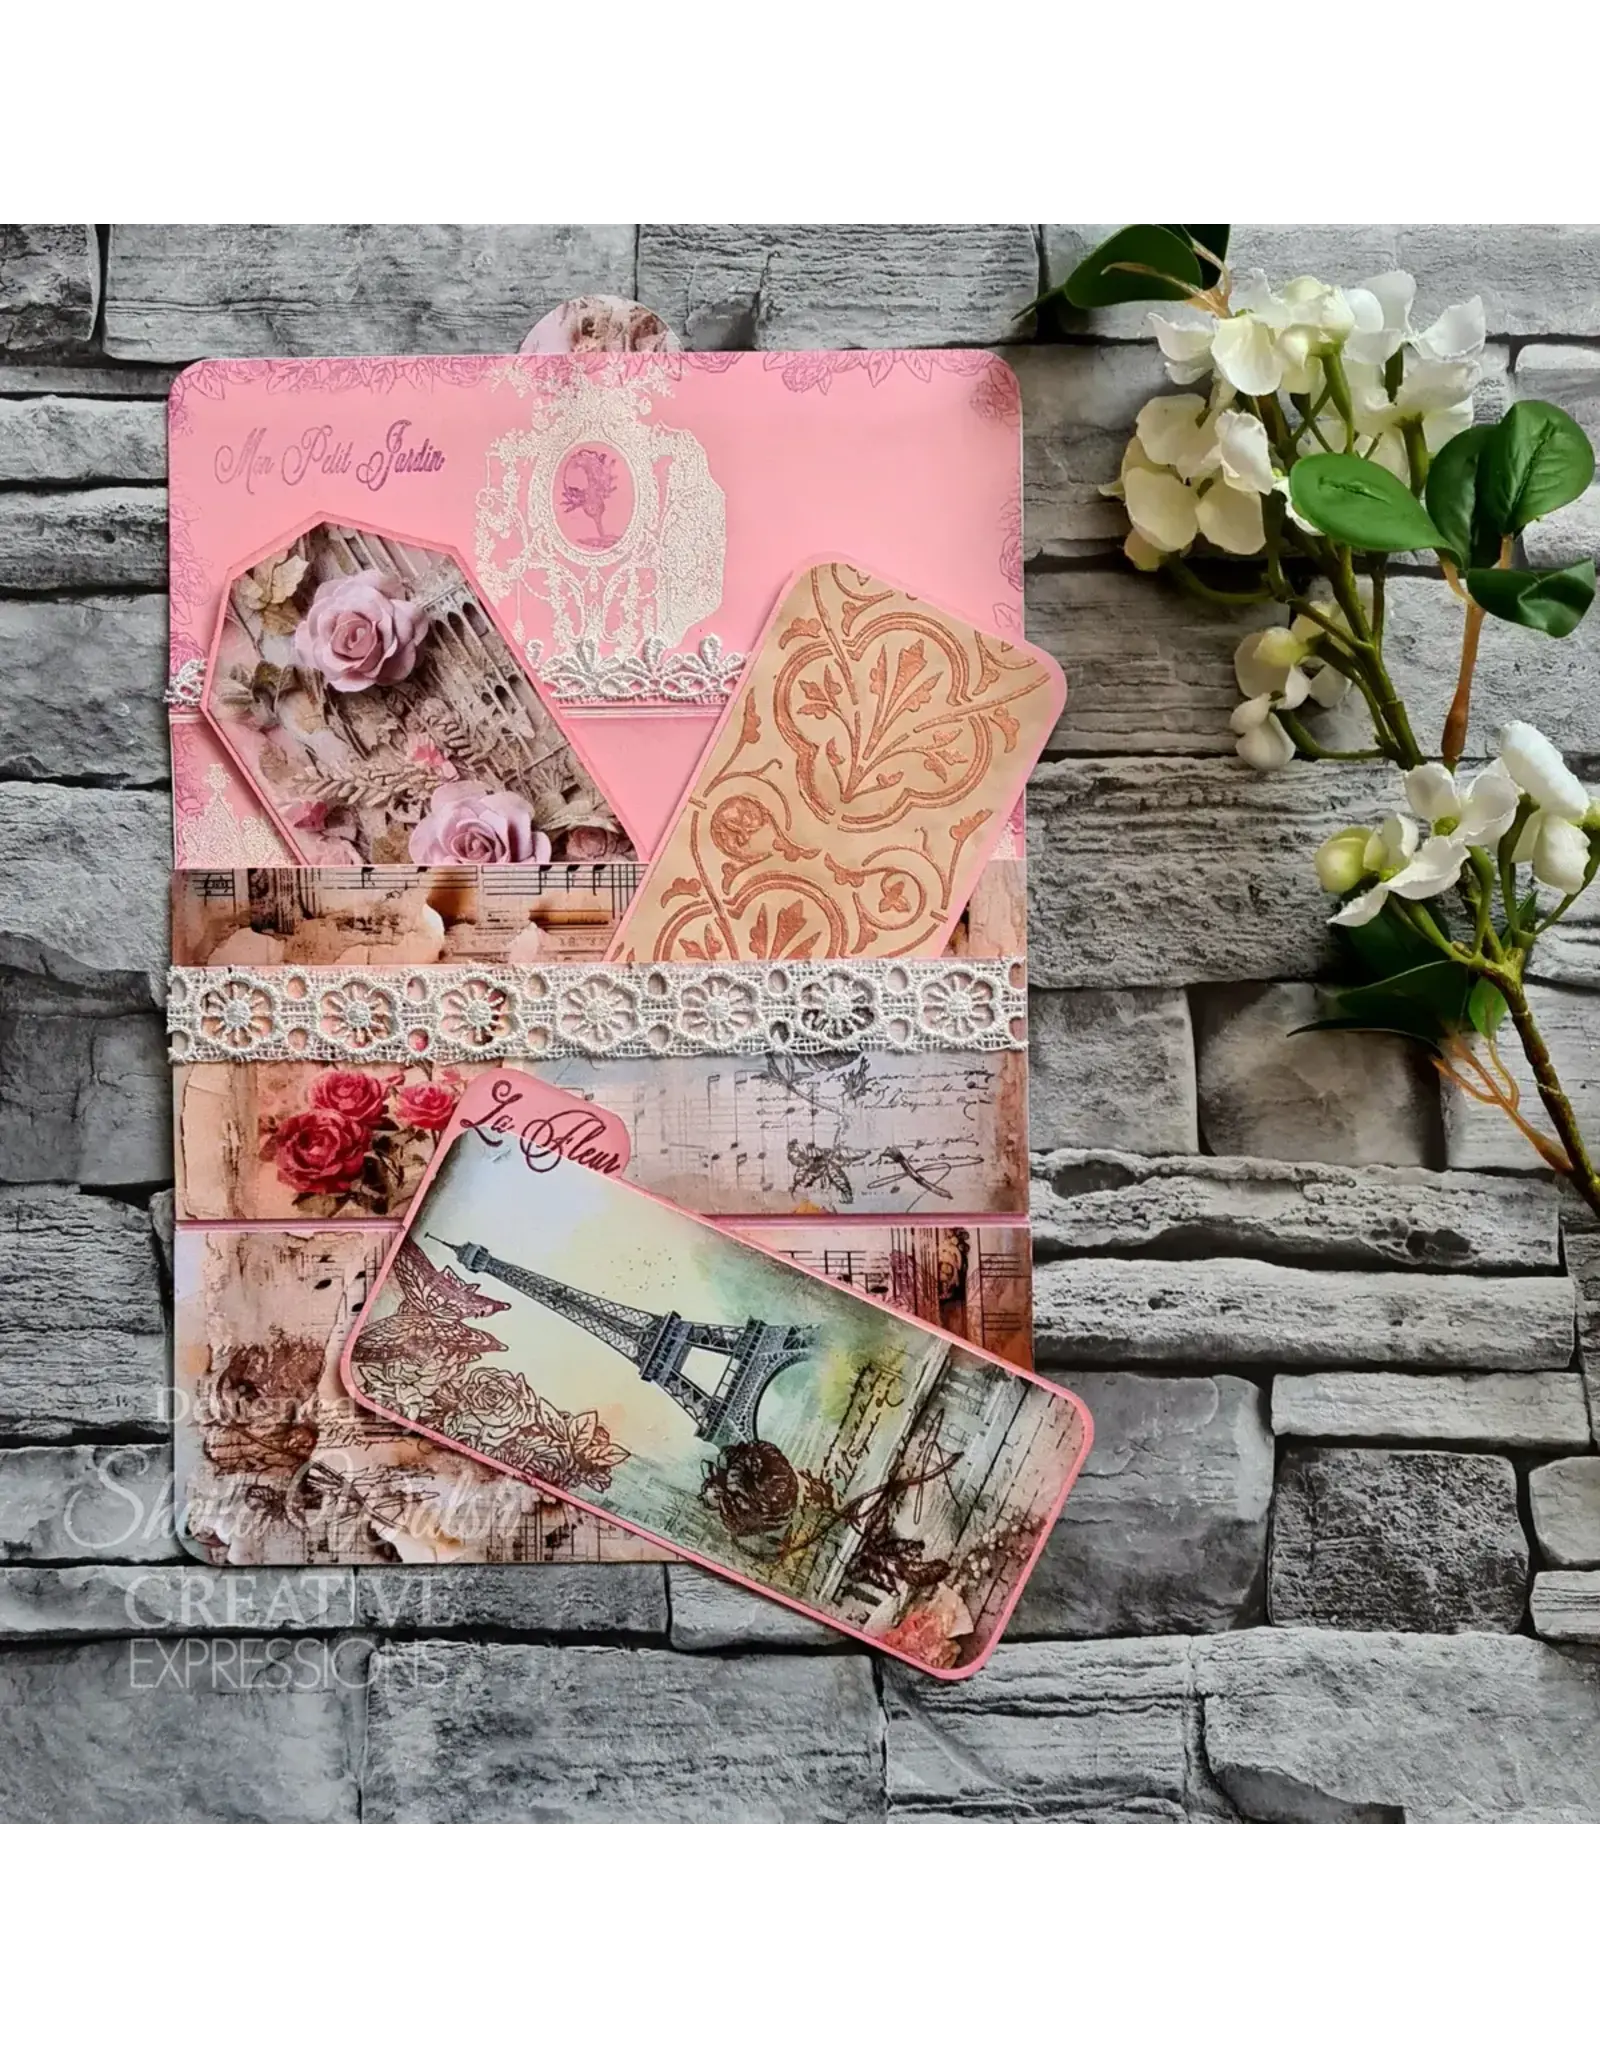 CREATIVE EXPRESSIONS CREATIVE EXPRESSIONS TAYLOR MADE JOURNALS CHATEAU GARDEN 6x8 CLEAR STAMP SET